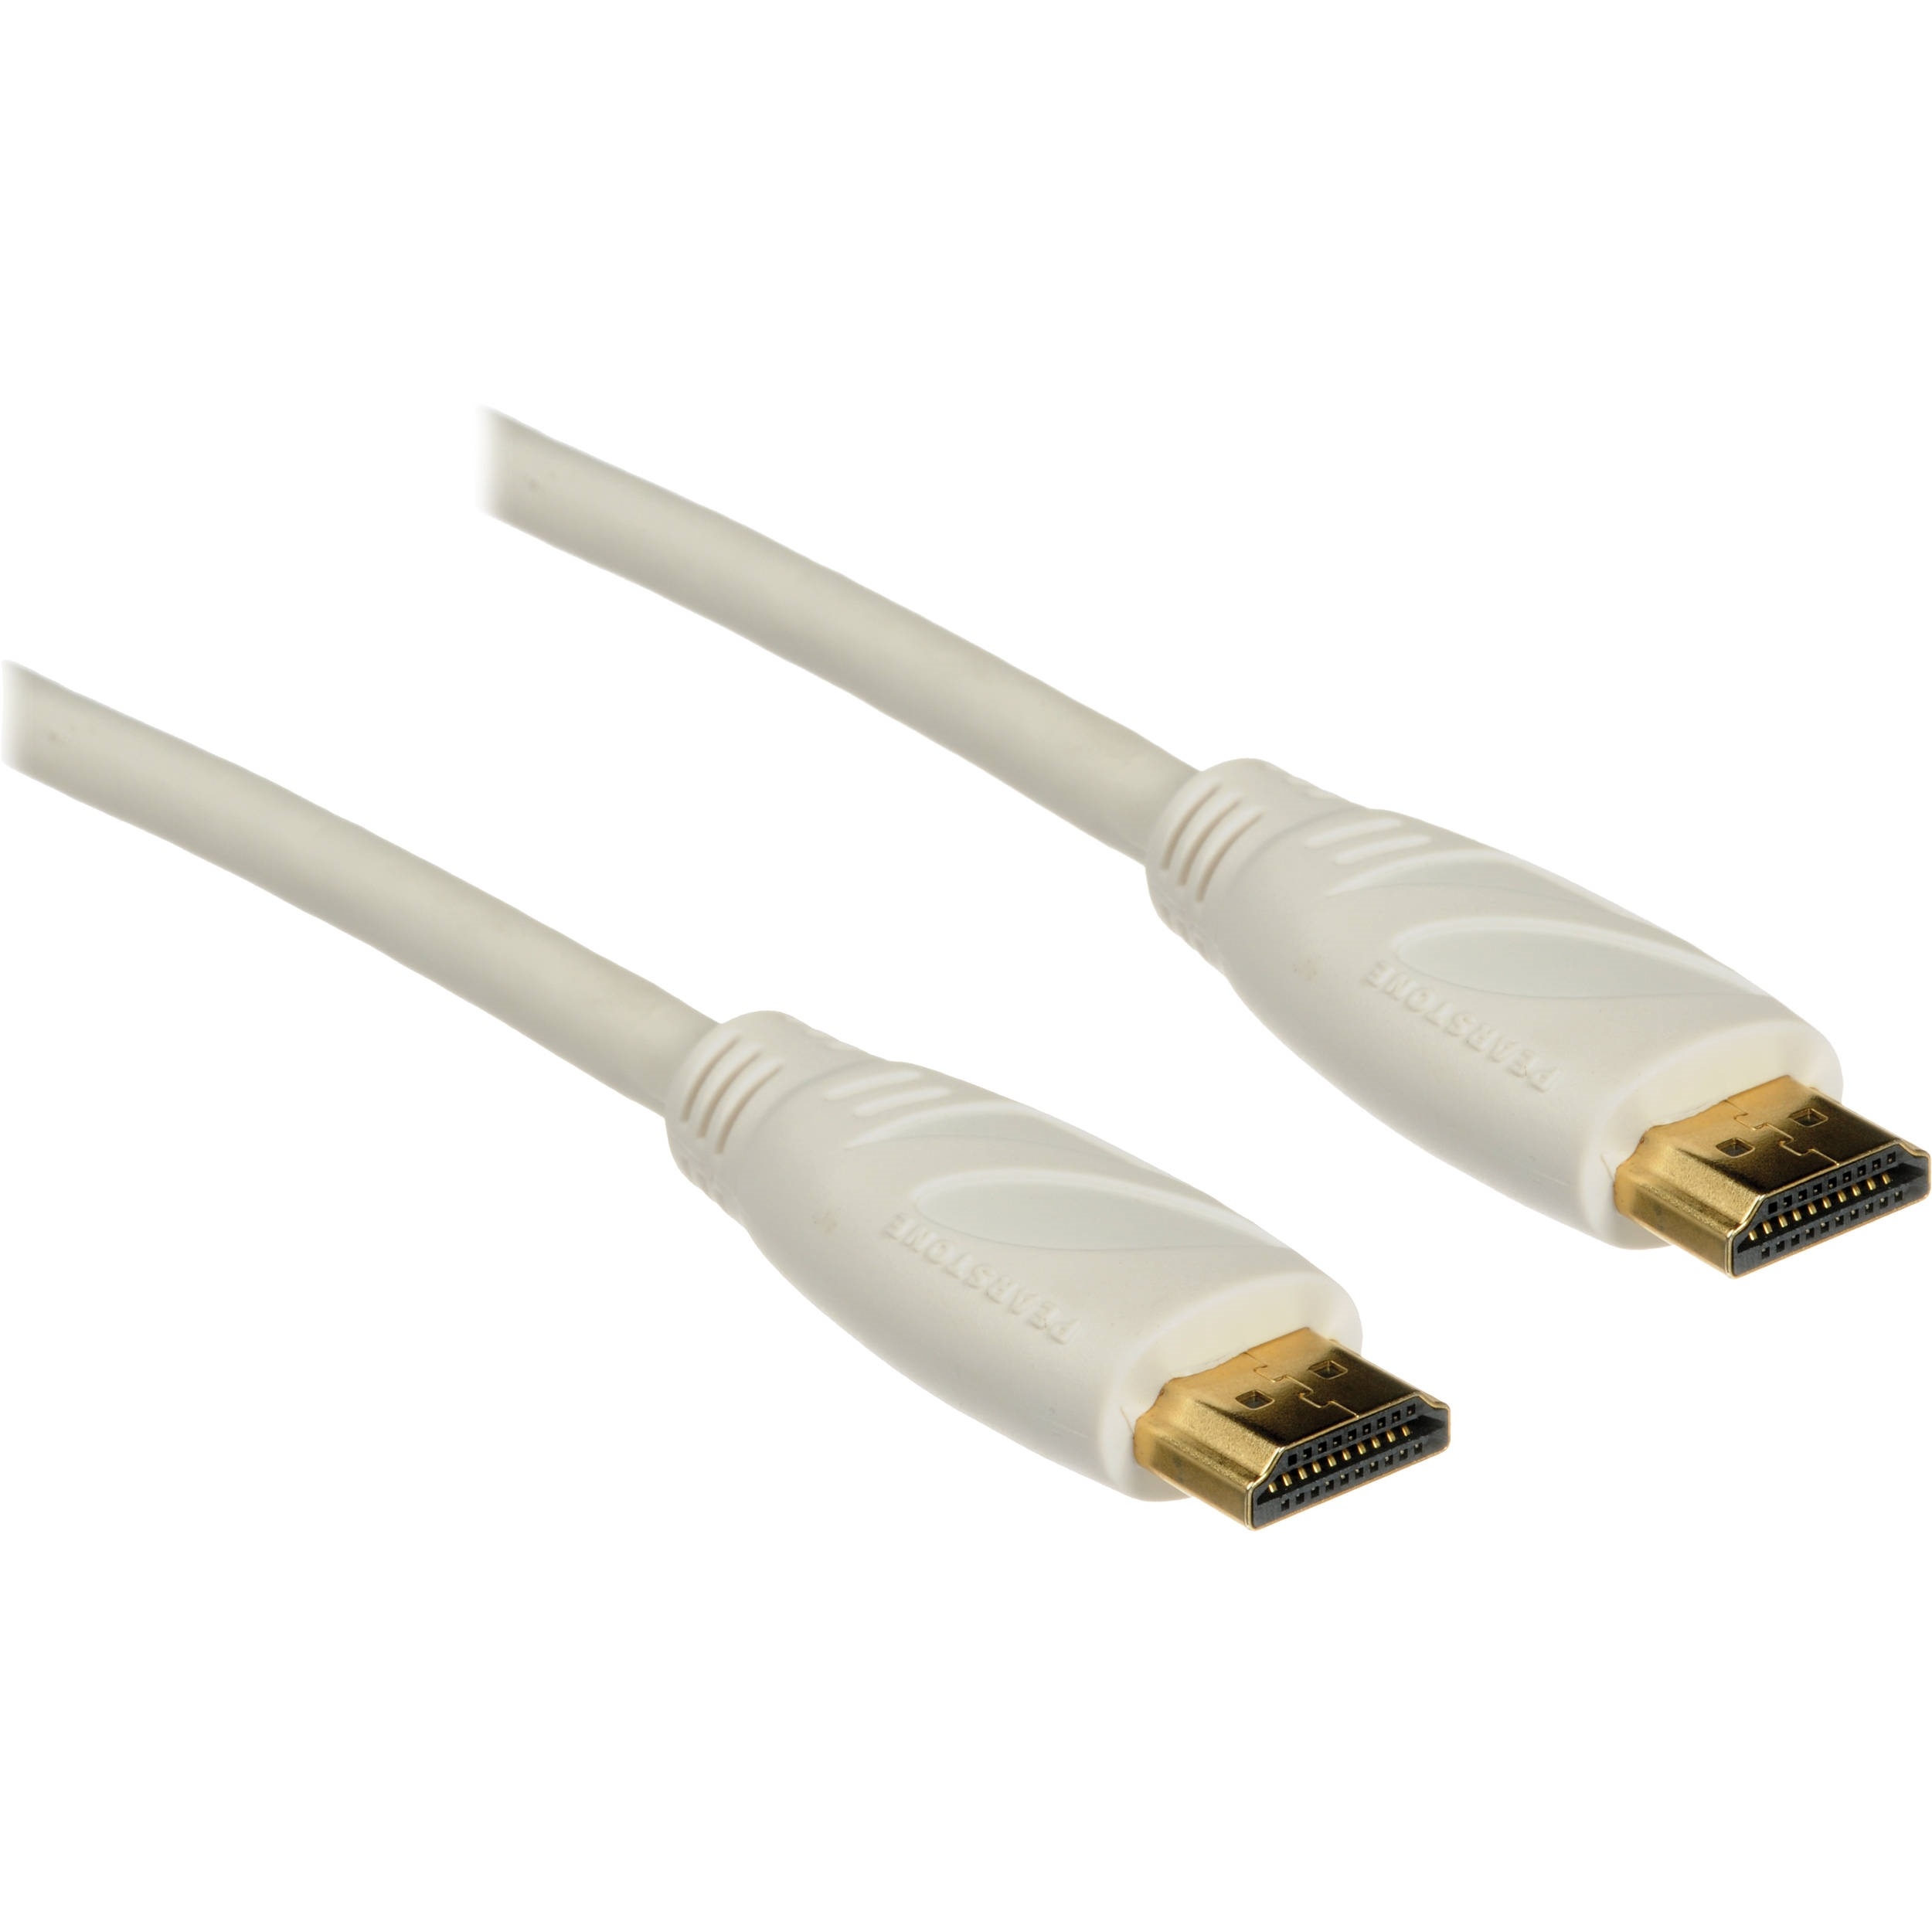 Pearstone HDA-115W High-Speed HDMI Cable with Ethernet (White, 15')